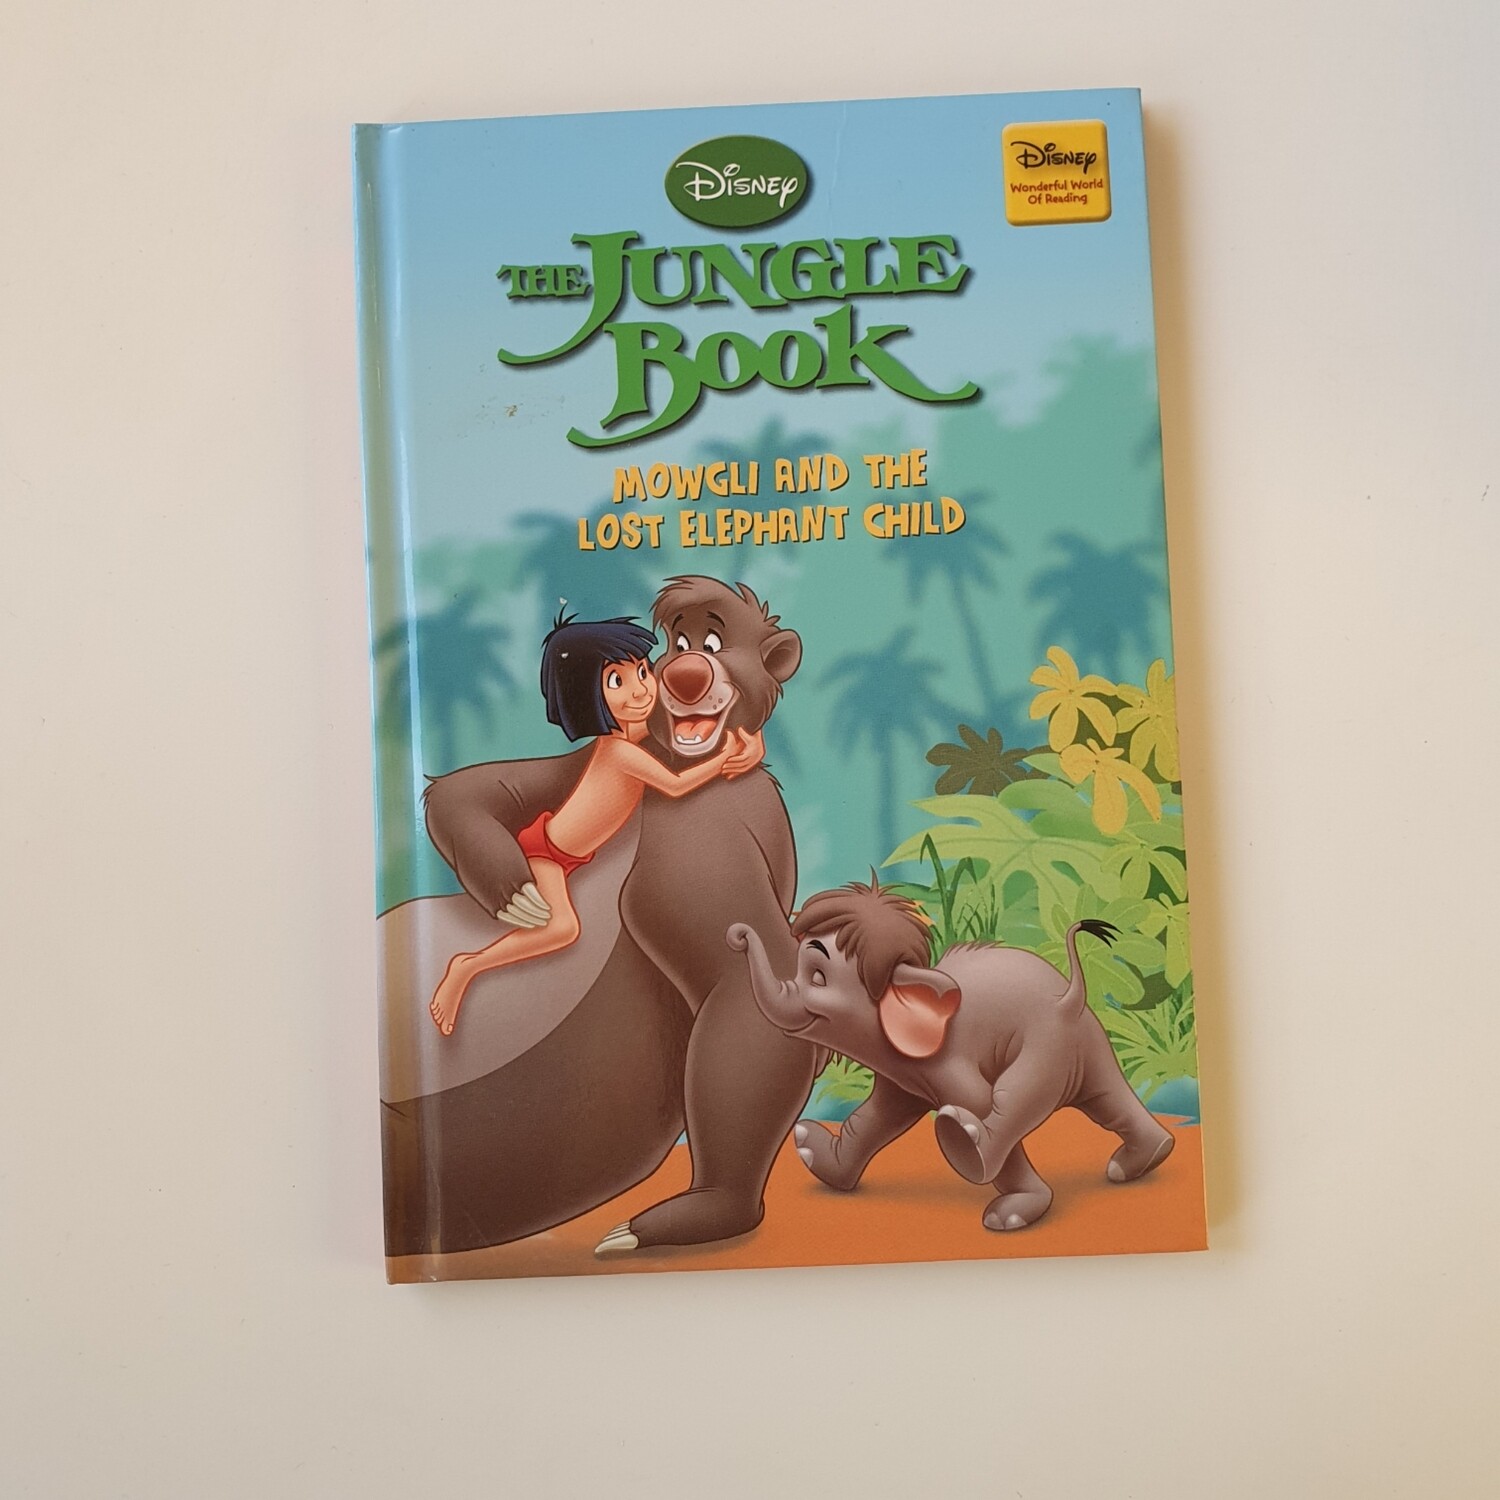 Jungle Book - mowgli and the lost elephant child Notebook